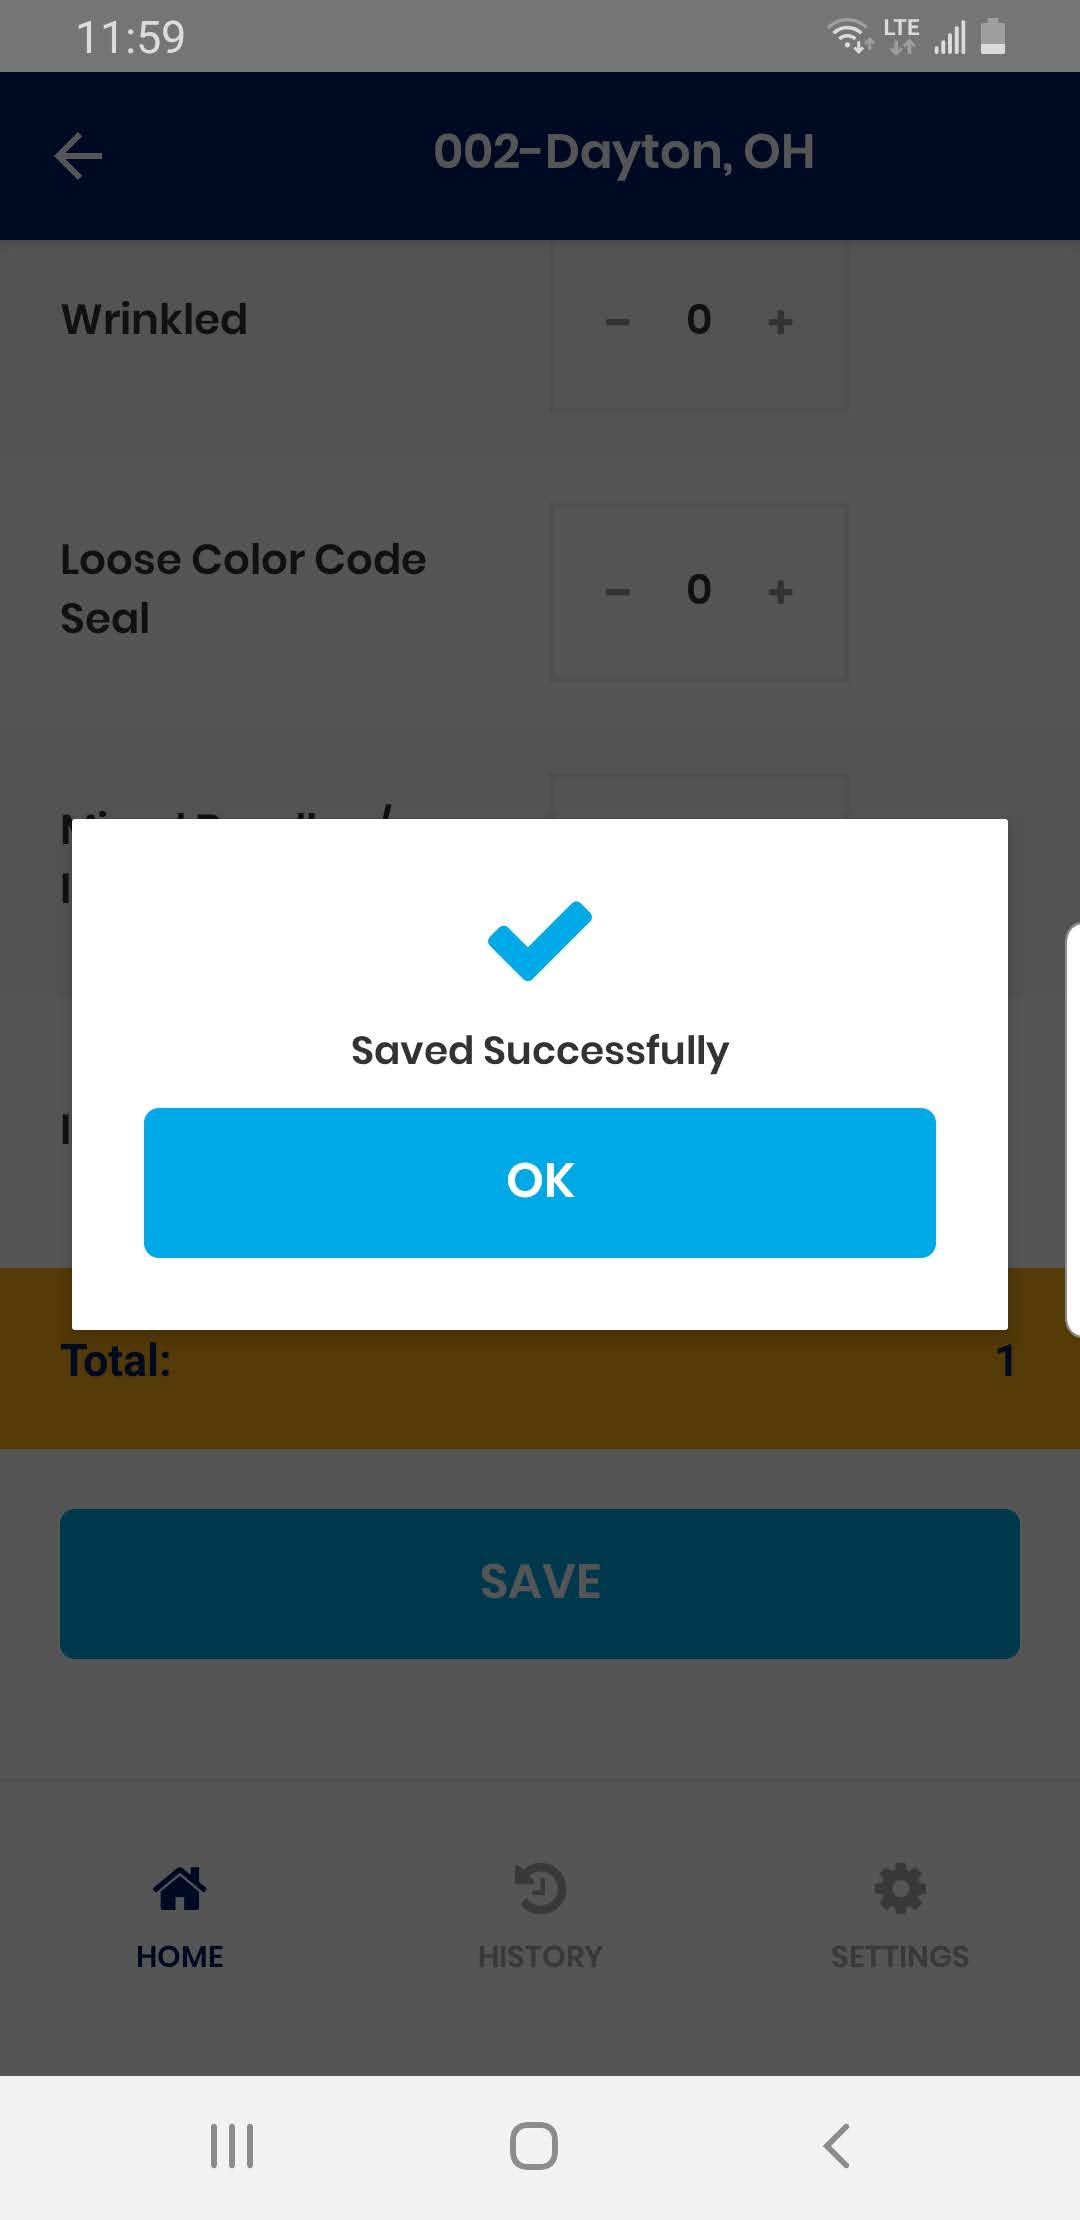 13.	Click on the Save to store non-conformance information. “Saved Successfully” message will appear once Save is completed. 